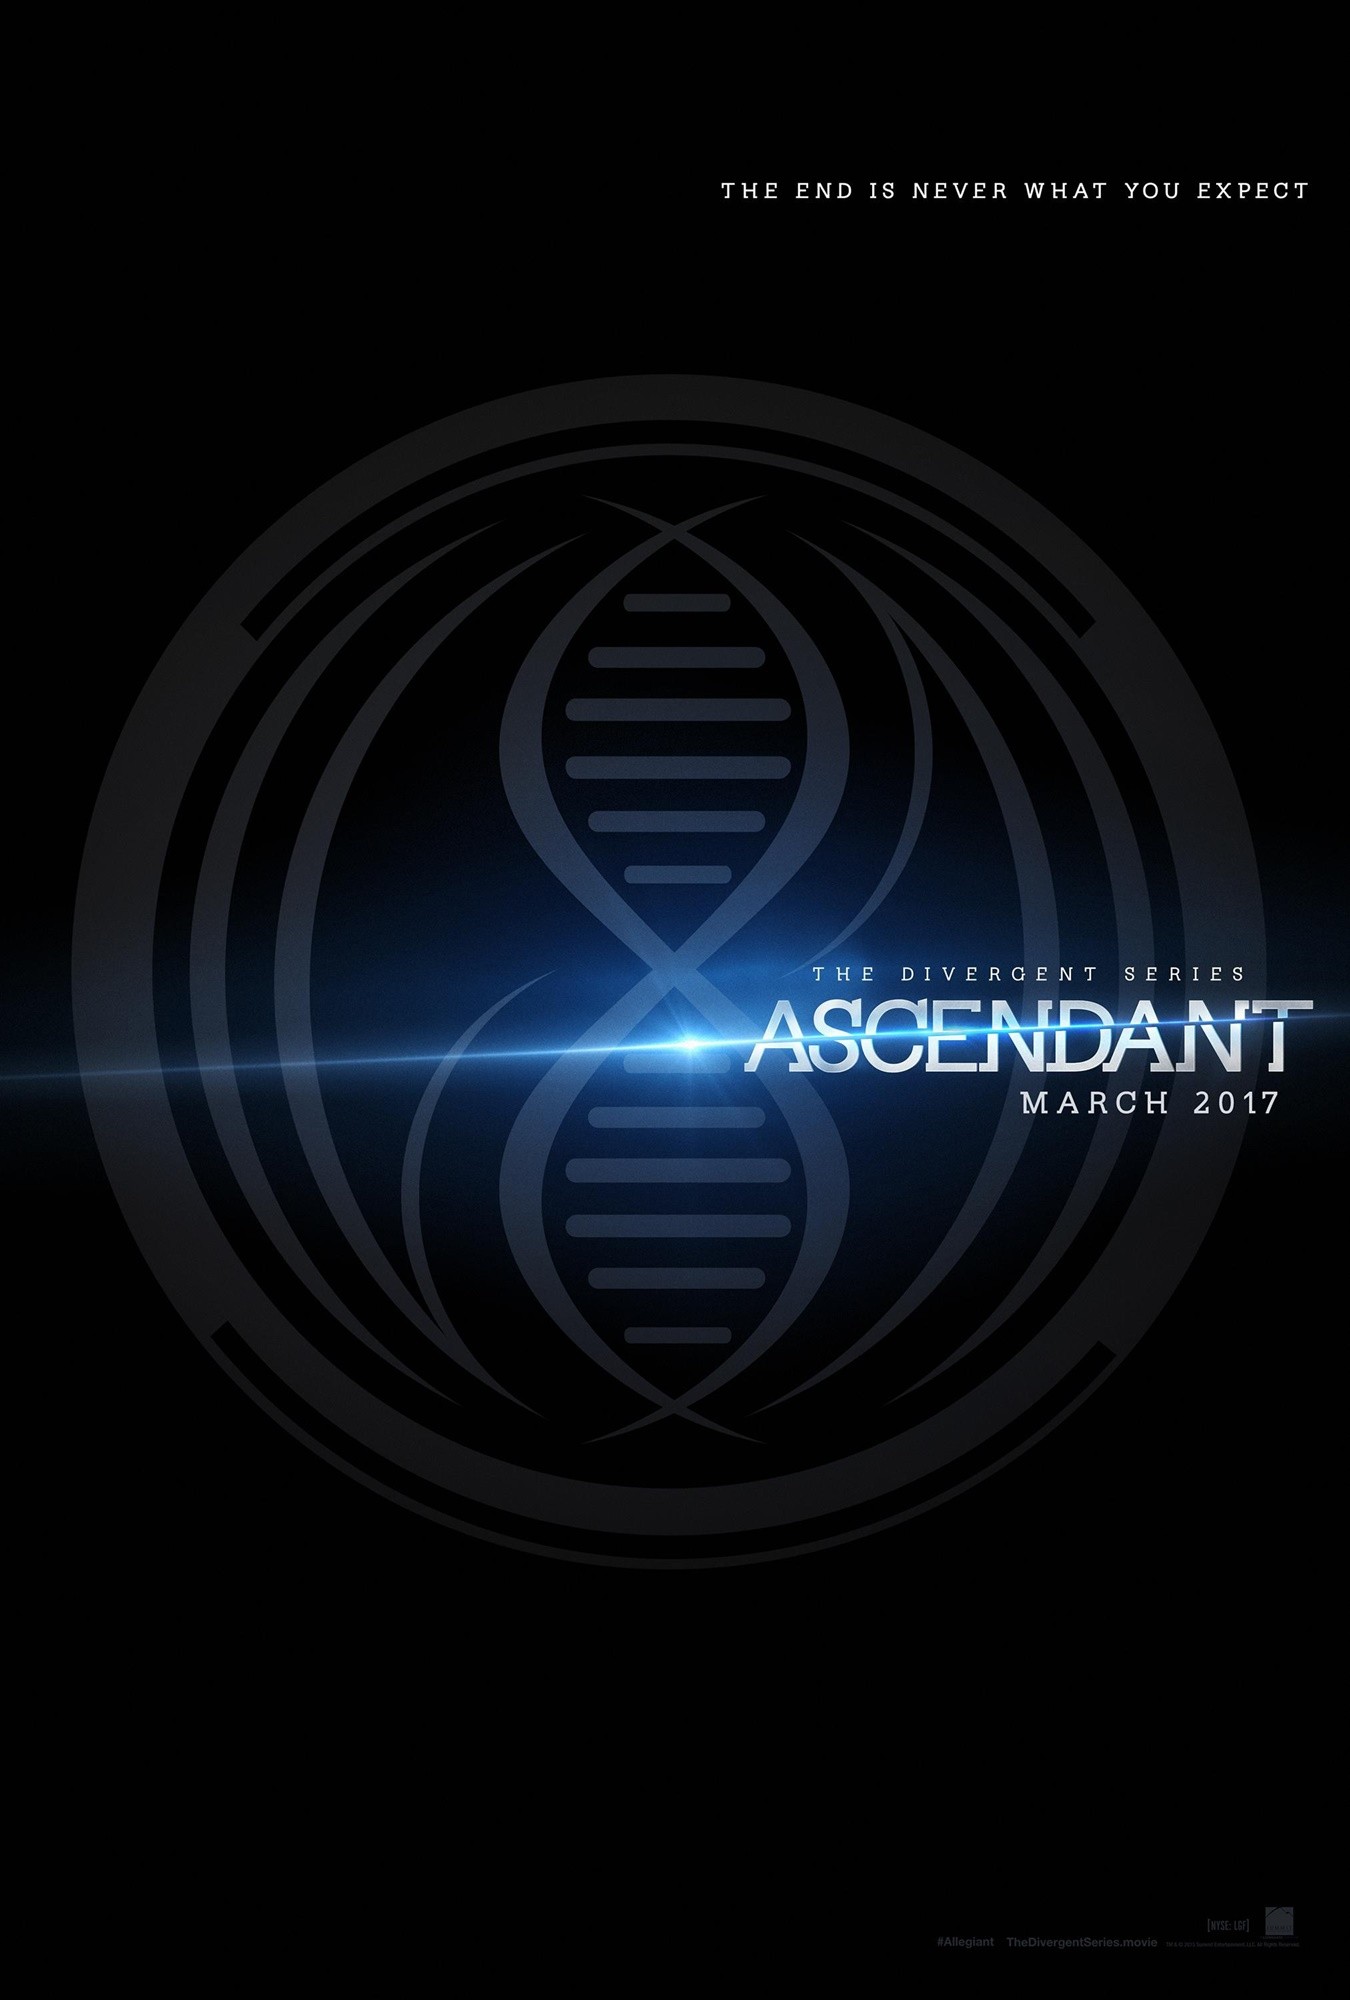 Poster of Summit Entertainment's The Divergent Series: Ascendant (2015)